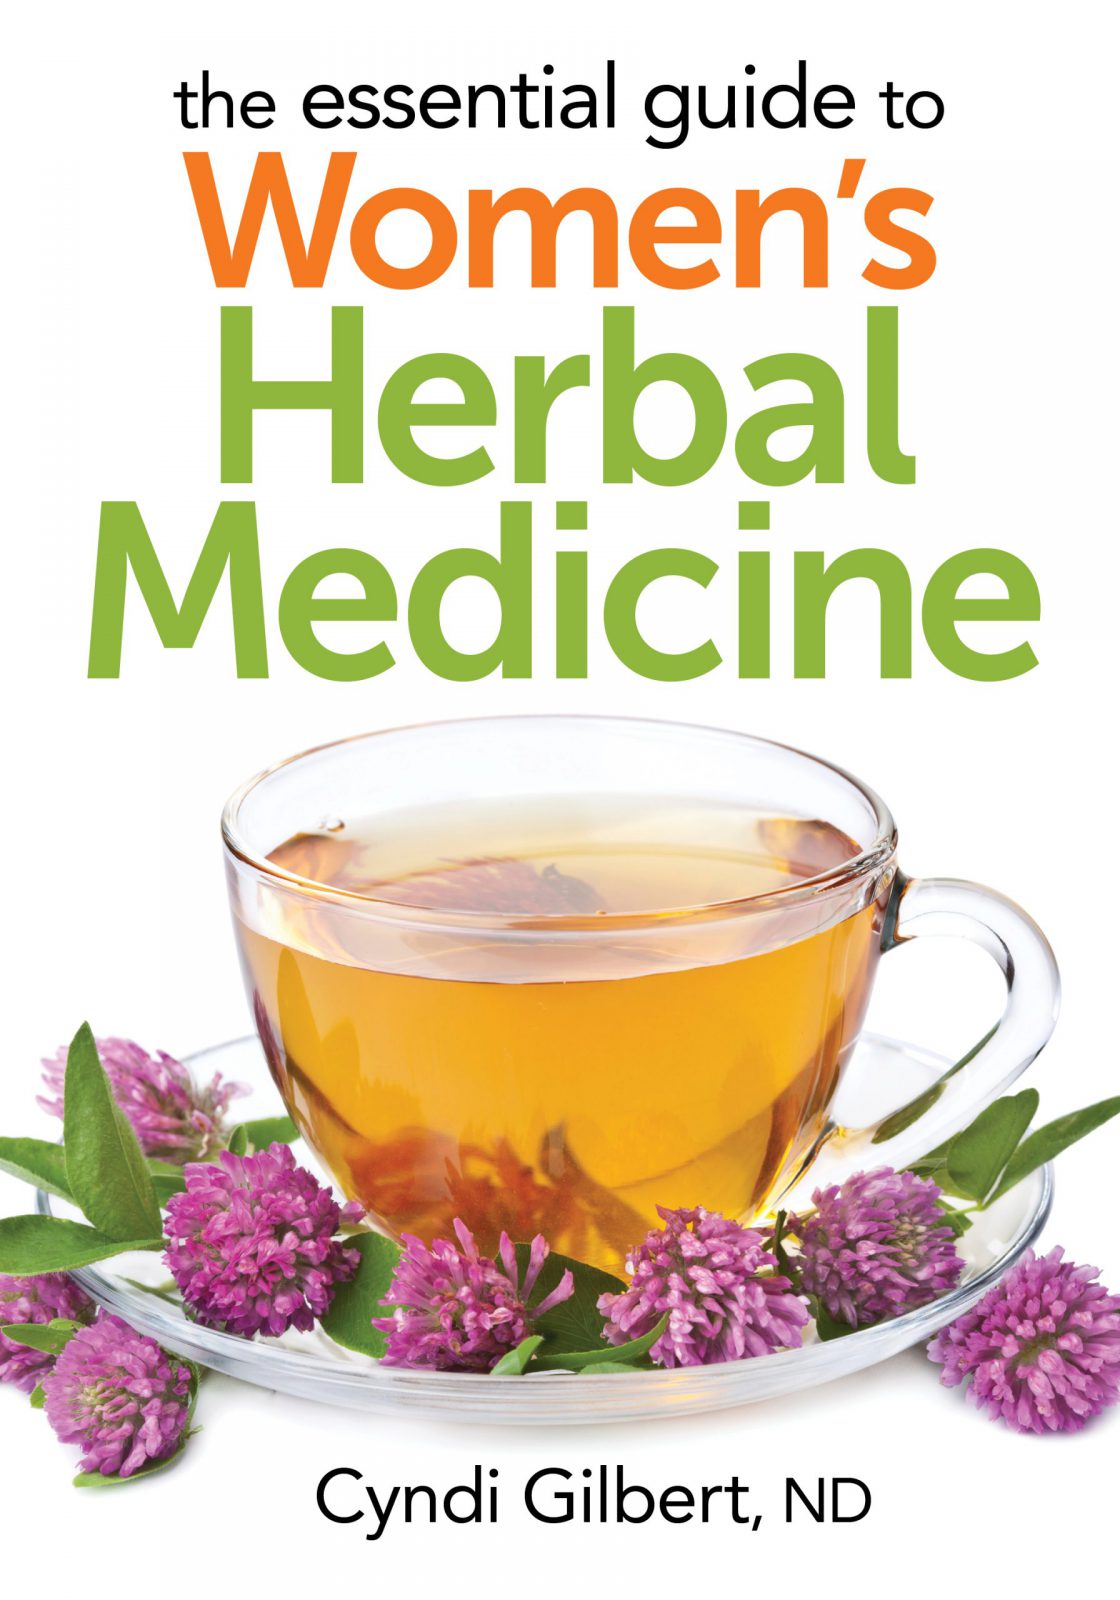 The Essential Guide to Women’s Herbal Medicine